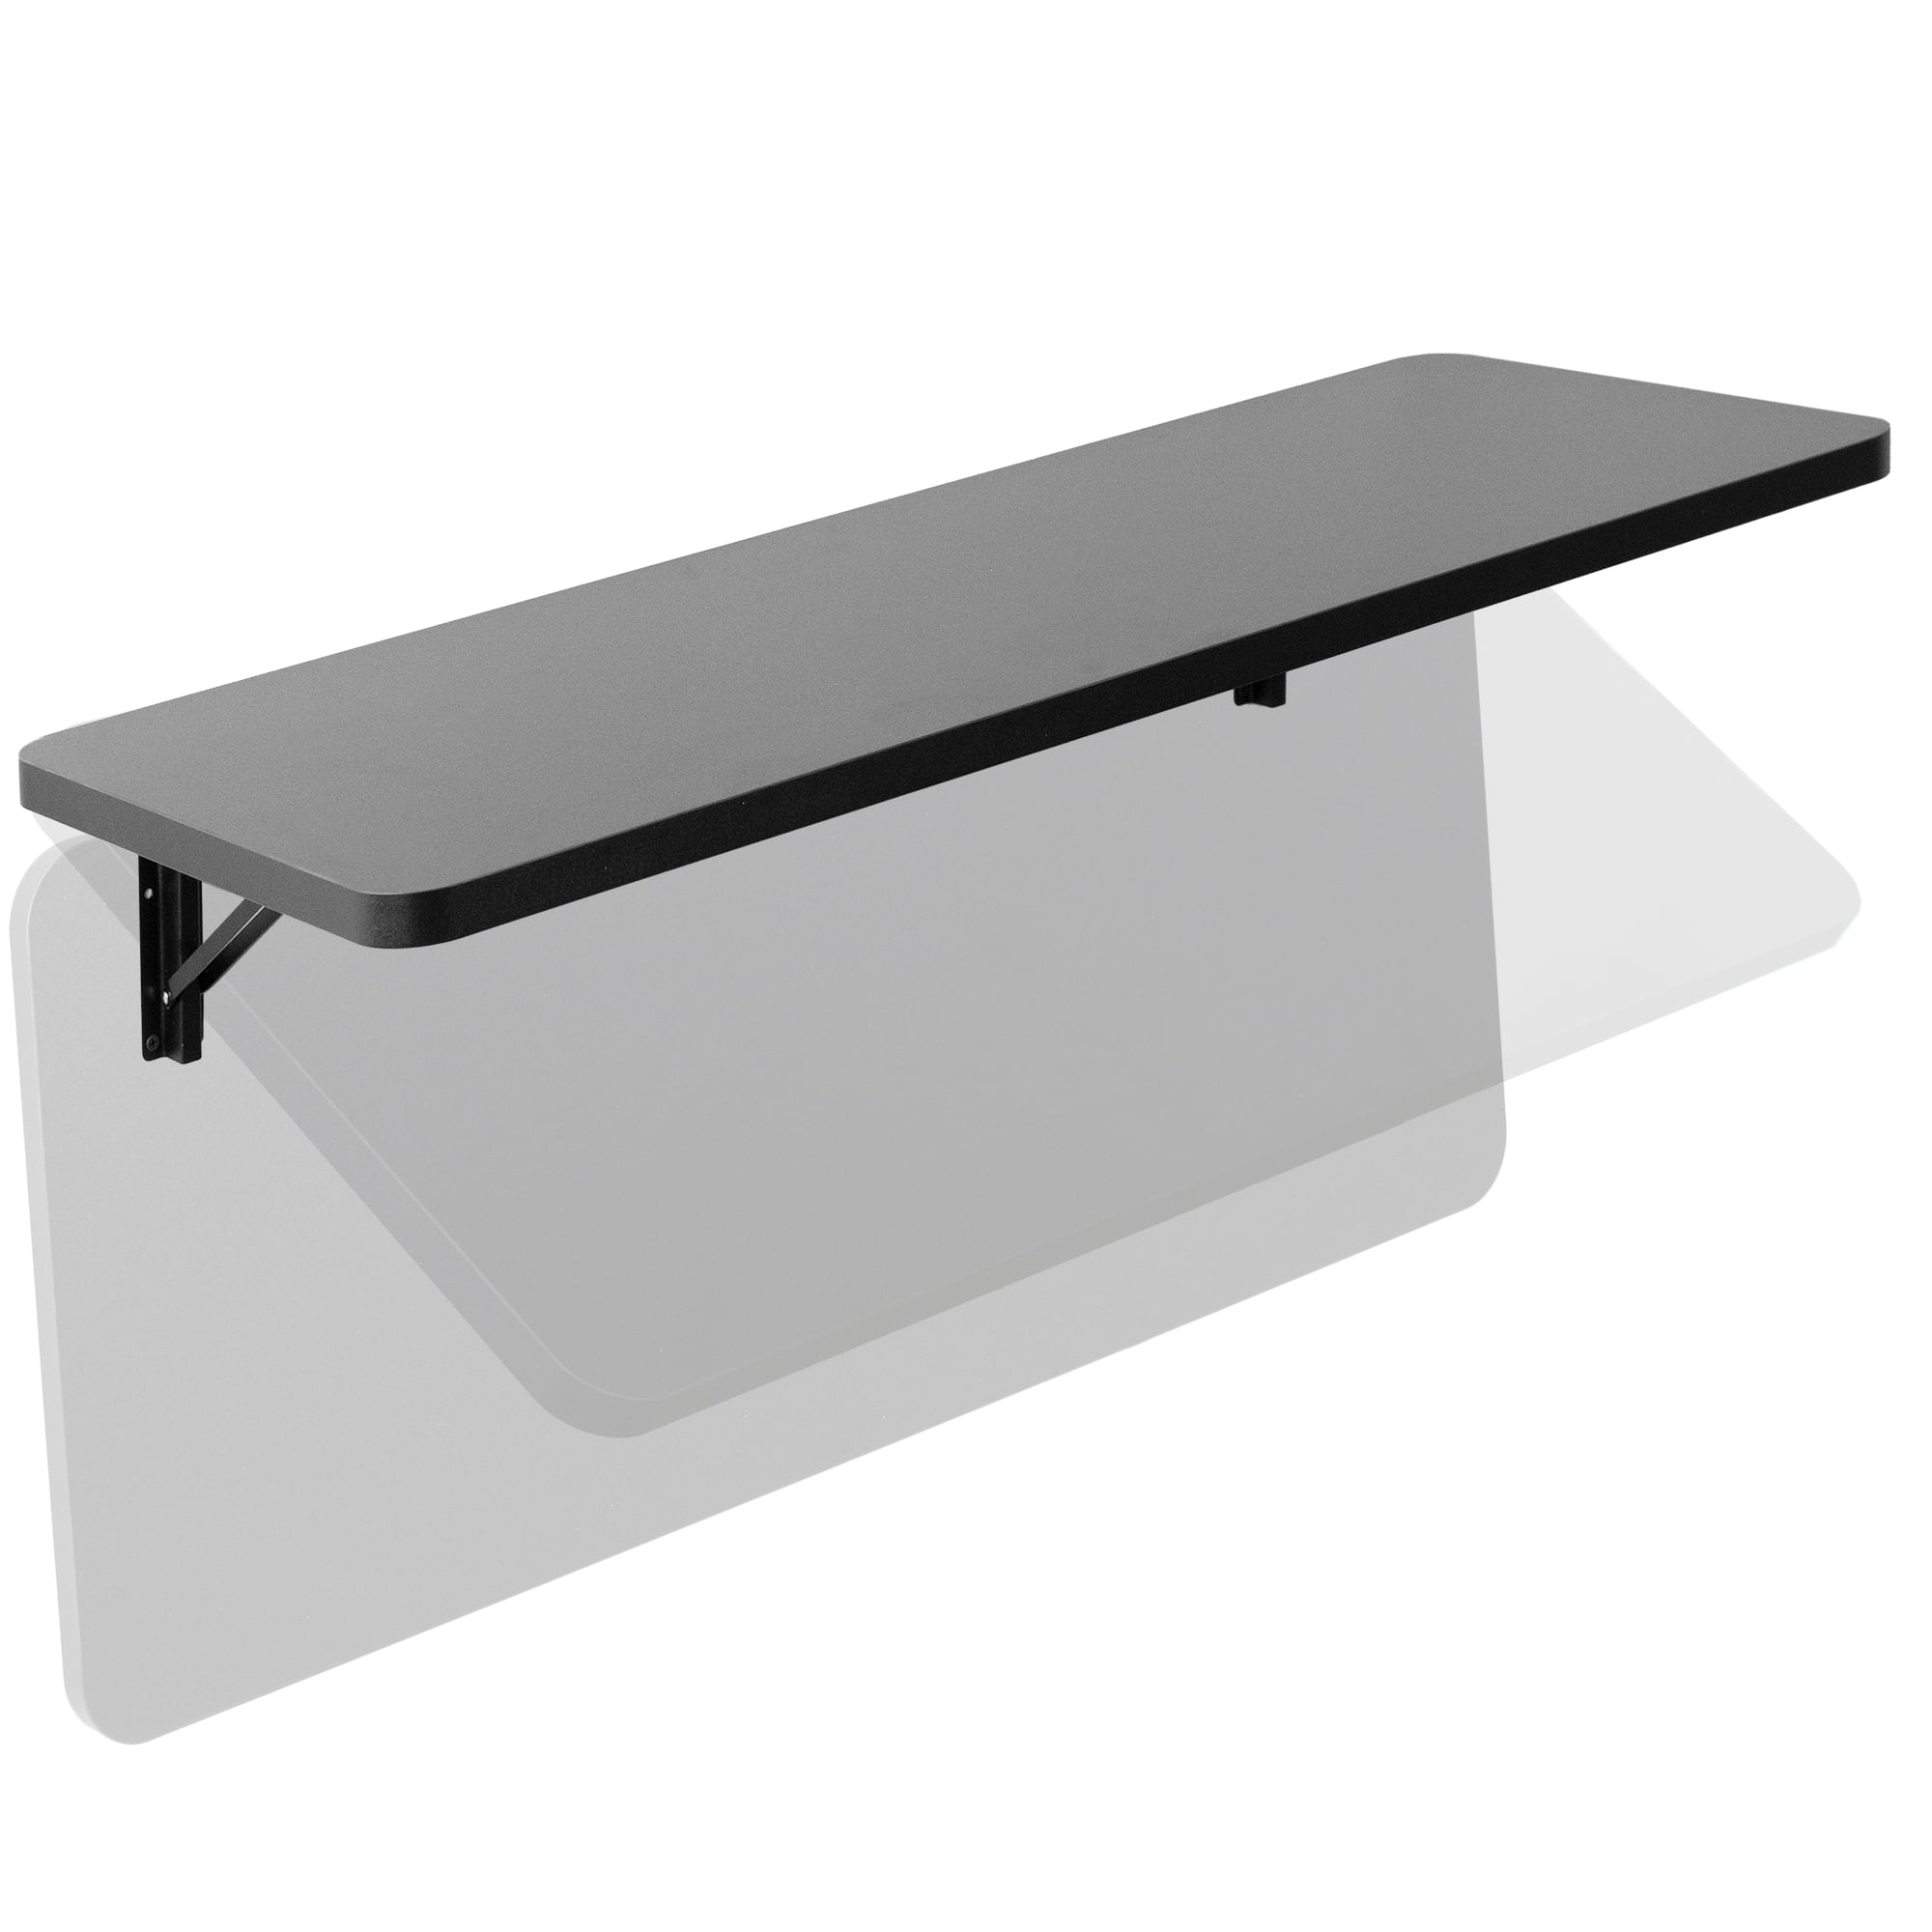 SafeRacks Wall Mounted Folding Table for Laundry Rooms & Garages